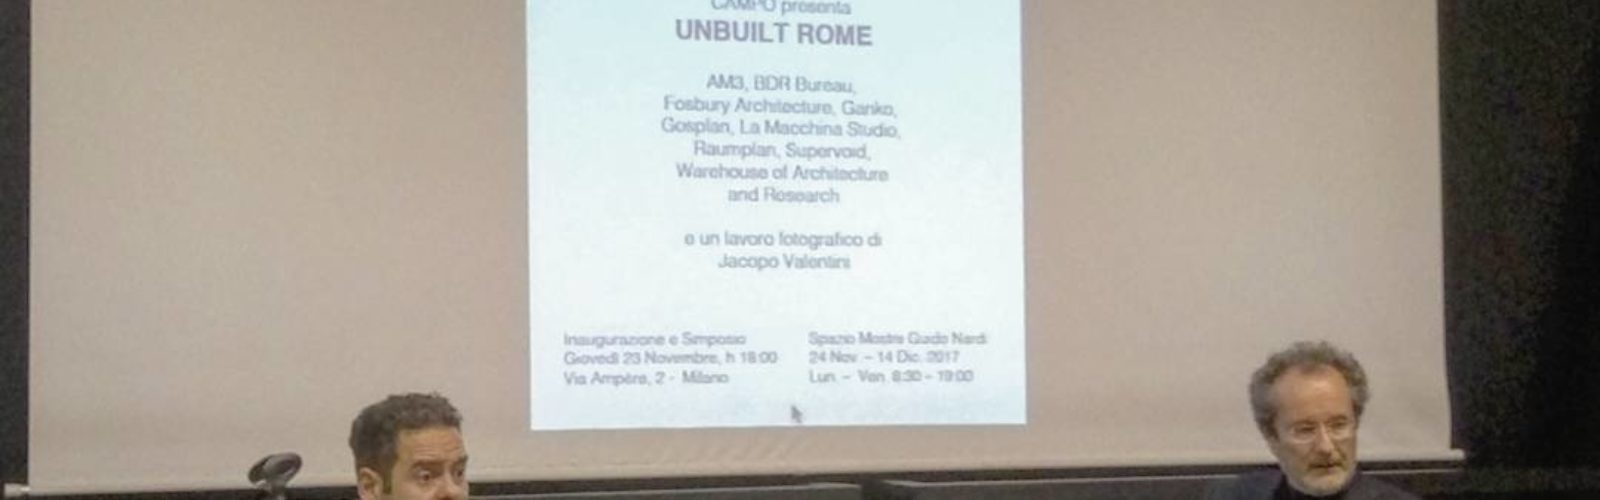 UNBUILT ROME exhibition opening yesterday at @polimi...